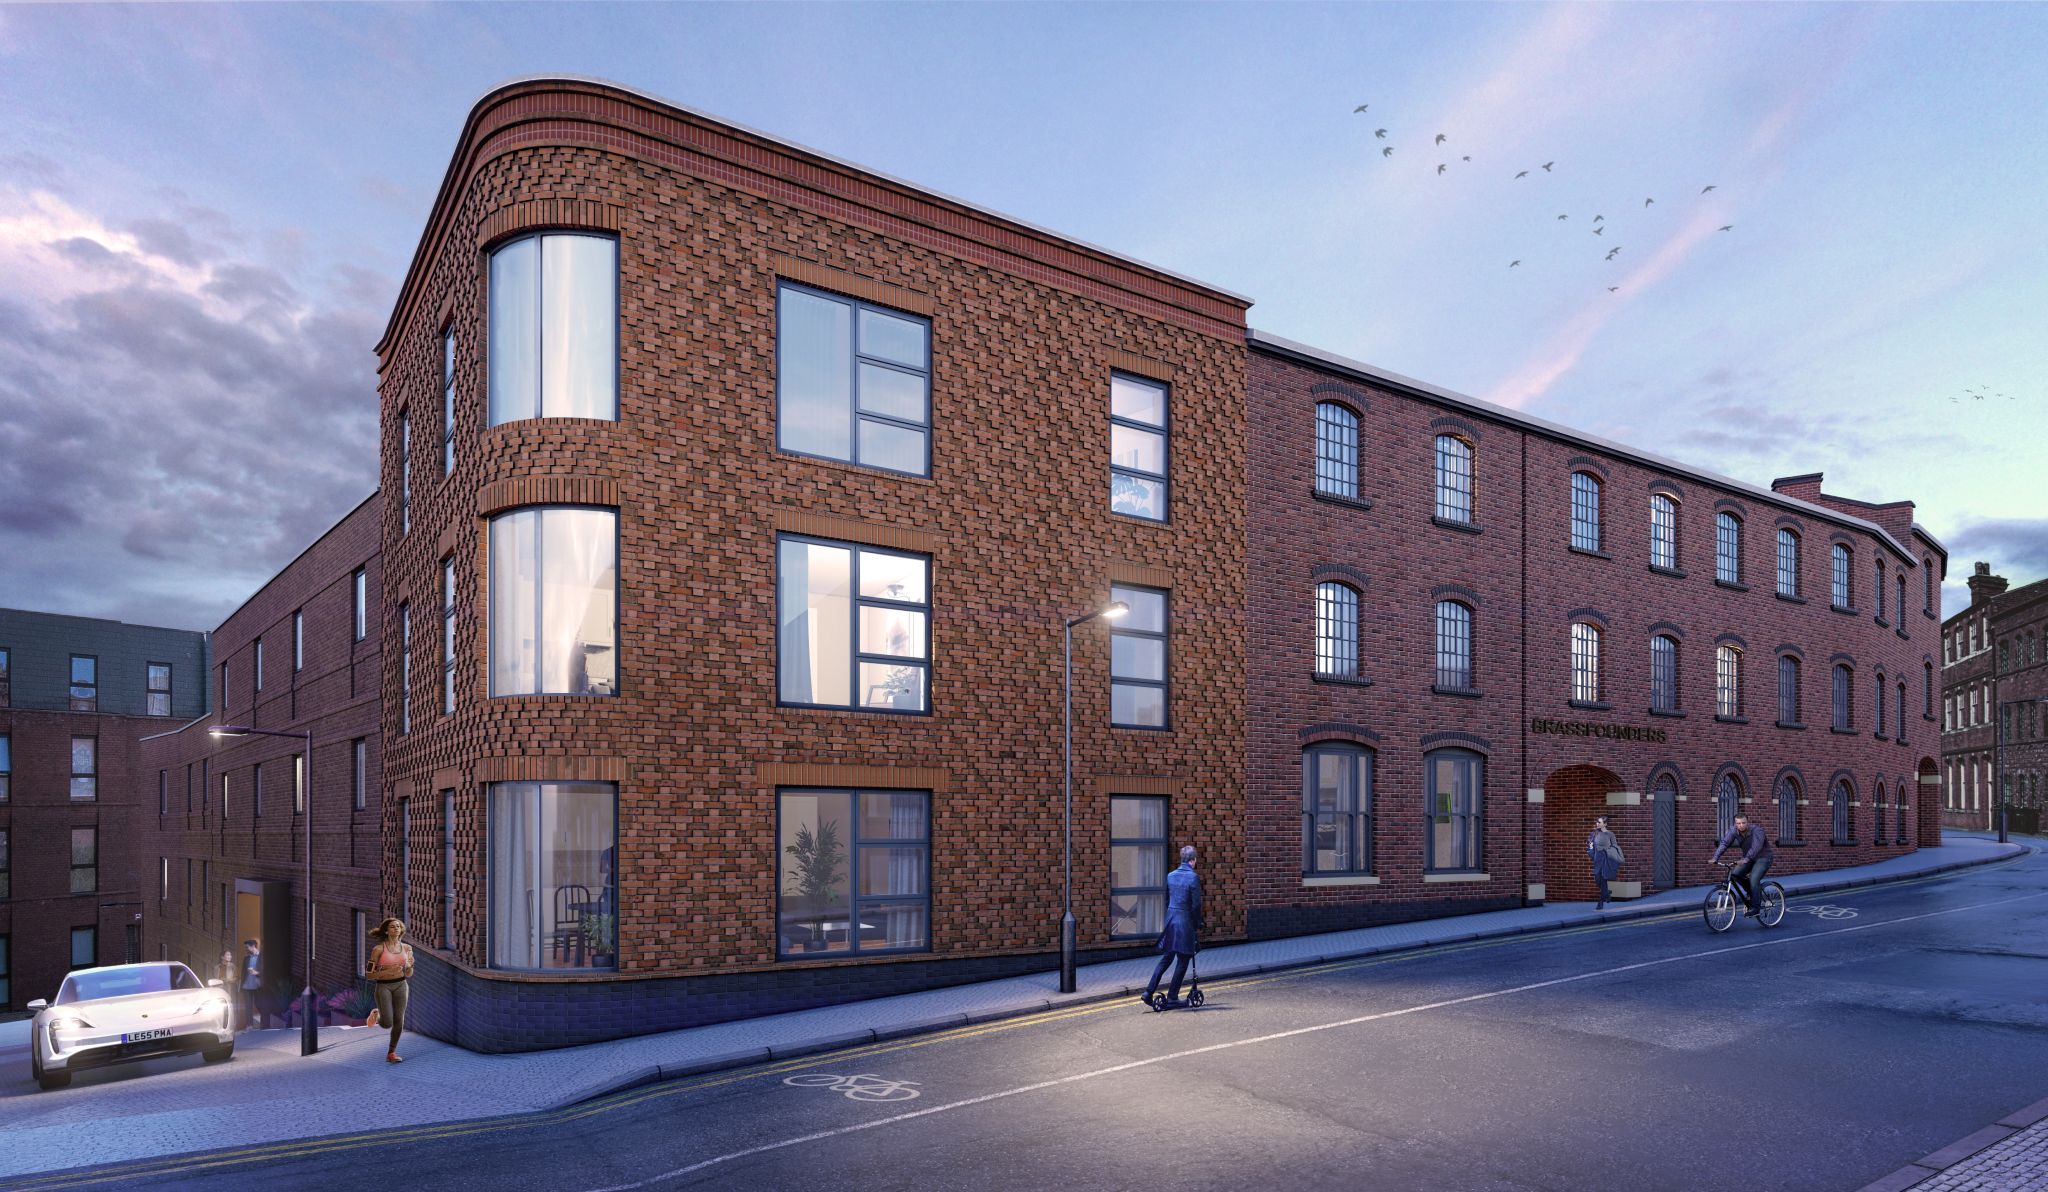 Kings Crescent Homes secures £16.5m Paragon funding